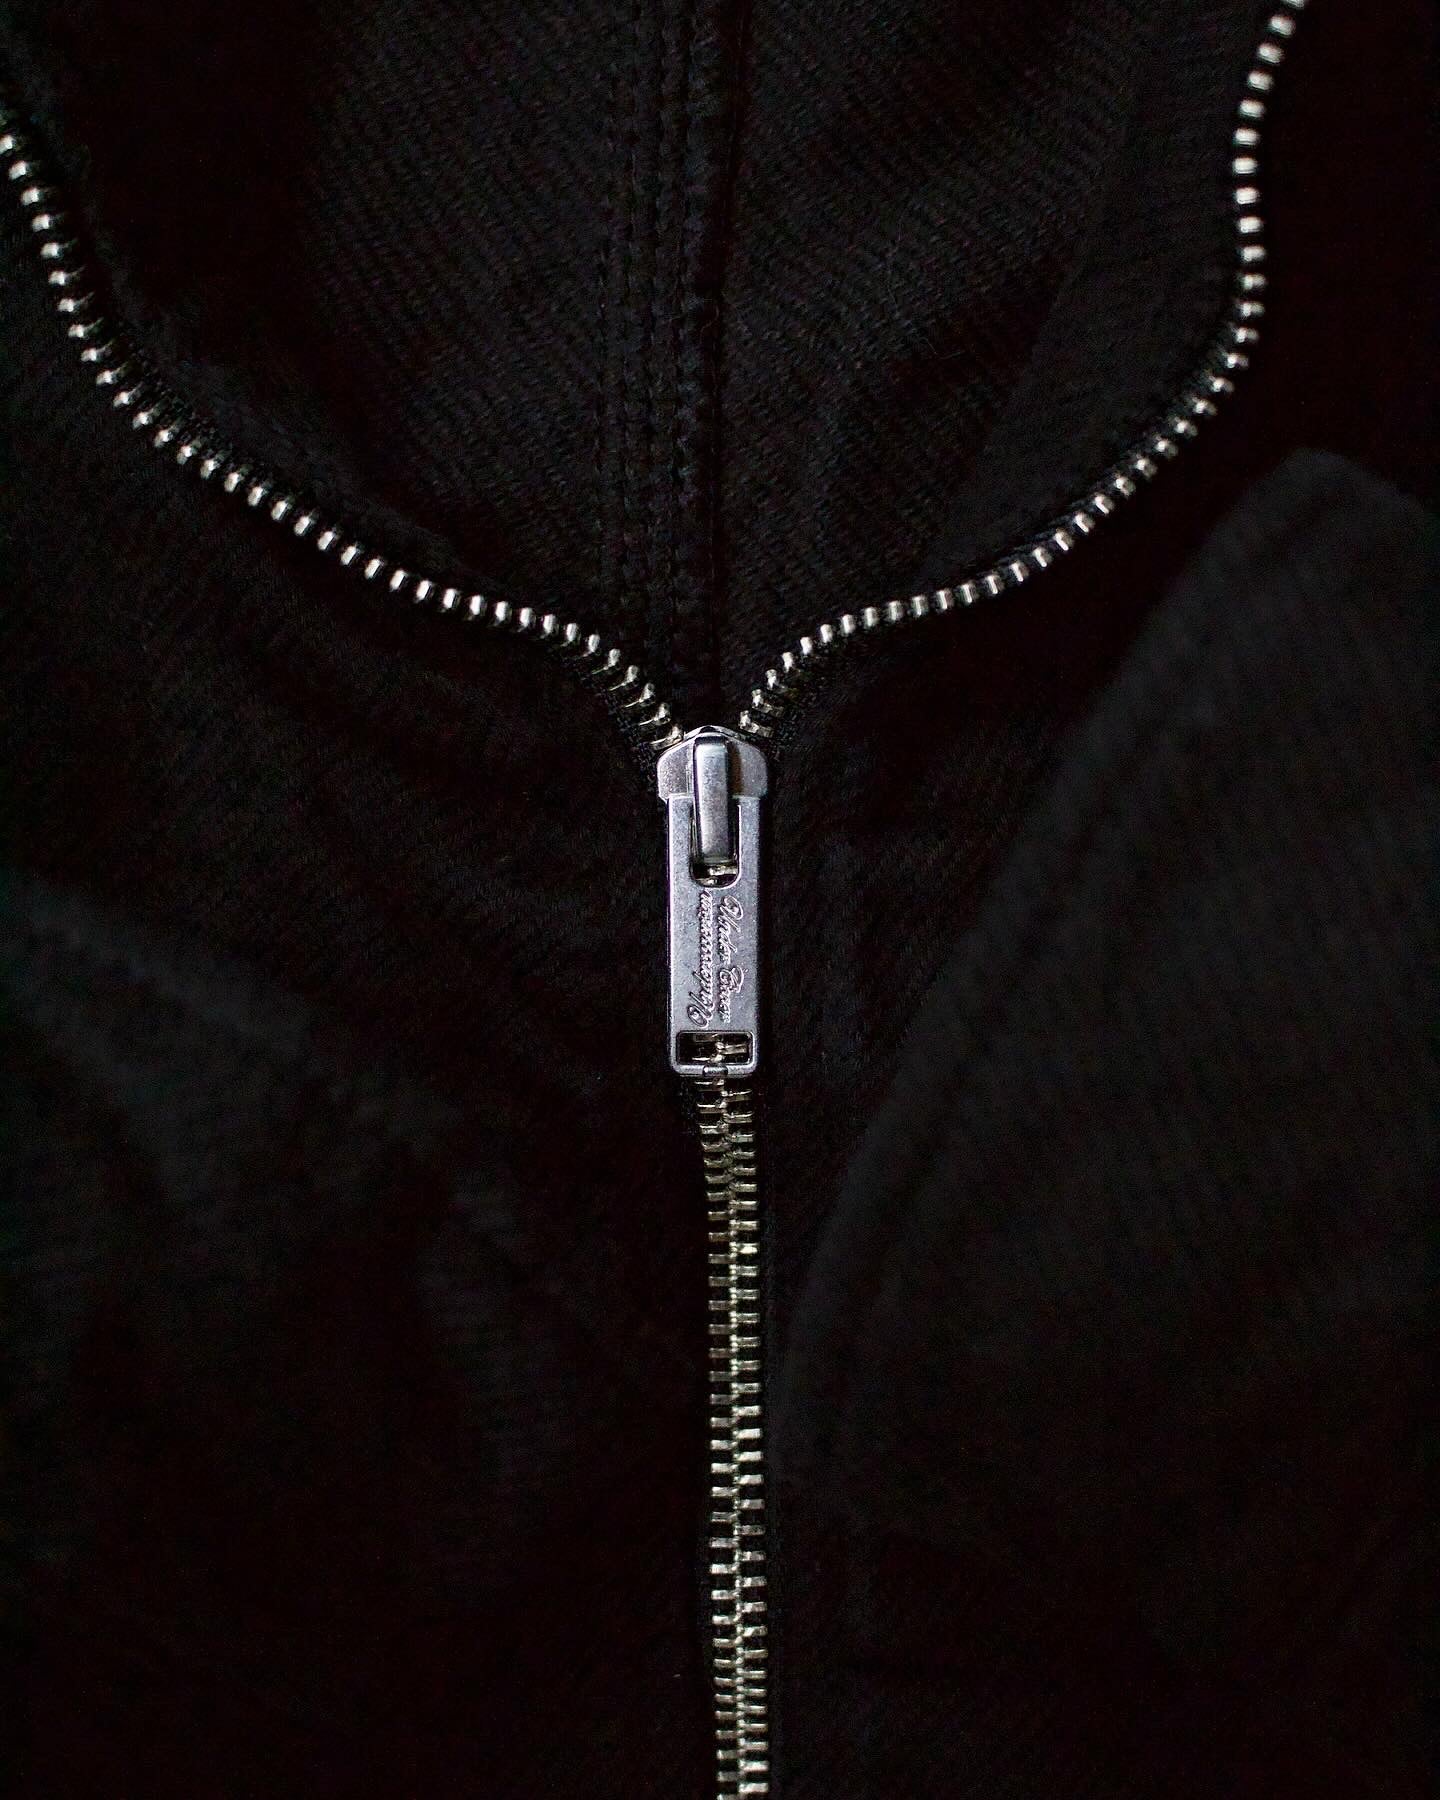 Undercover SS18 “Spiritual Noise” Fray Work Jacket